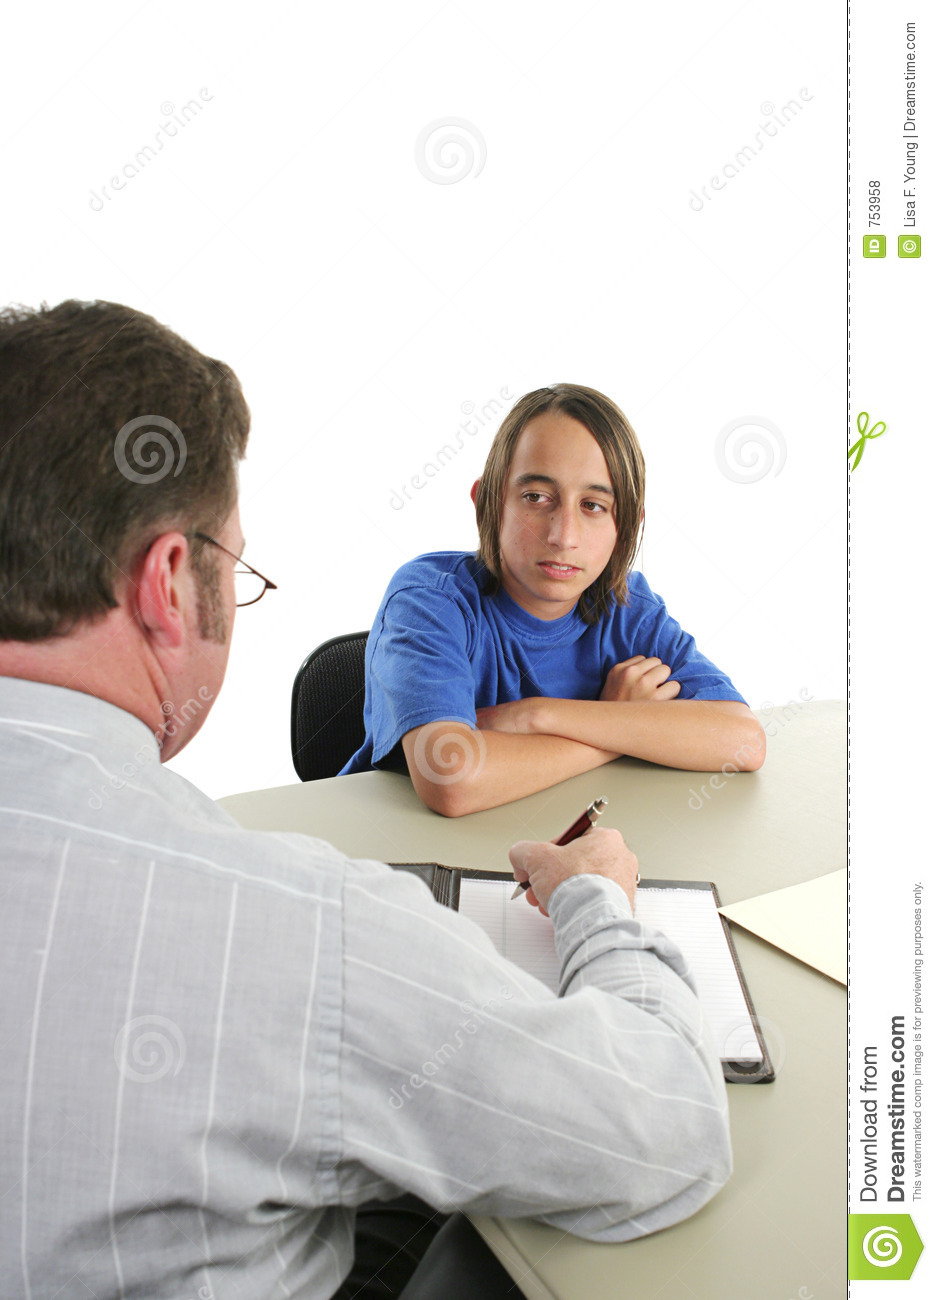 Serious Student Teacher Conference Royalty Free Stock Photos   Image